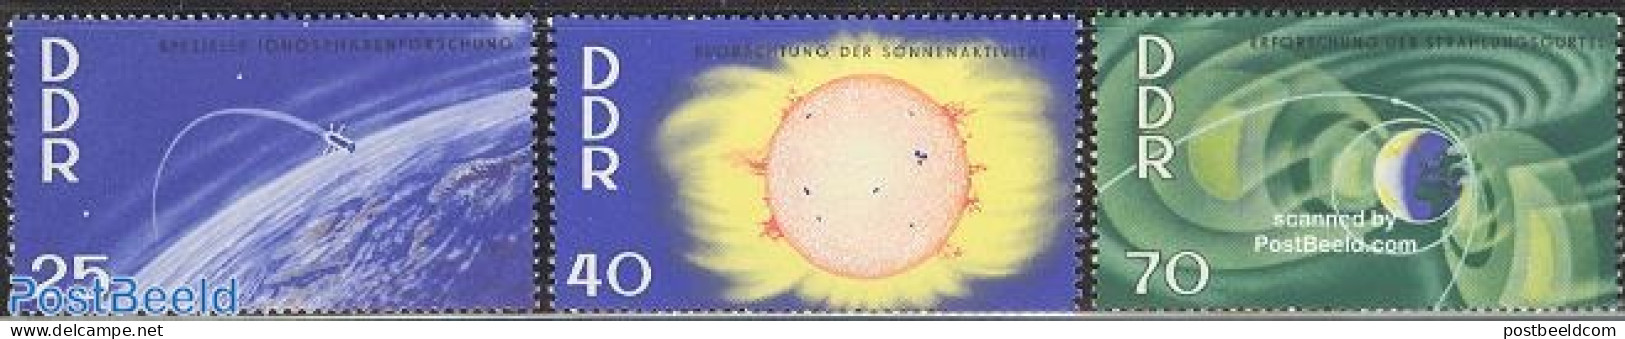 Germany, DDR 1964 QUIET SUN YEAR 3V, Mint NH, Science - Astronomy - Nuevos